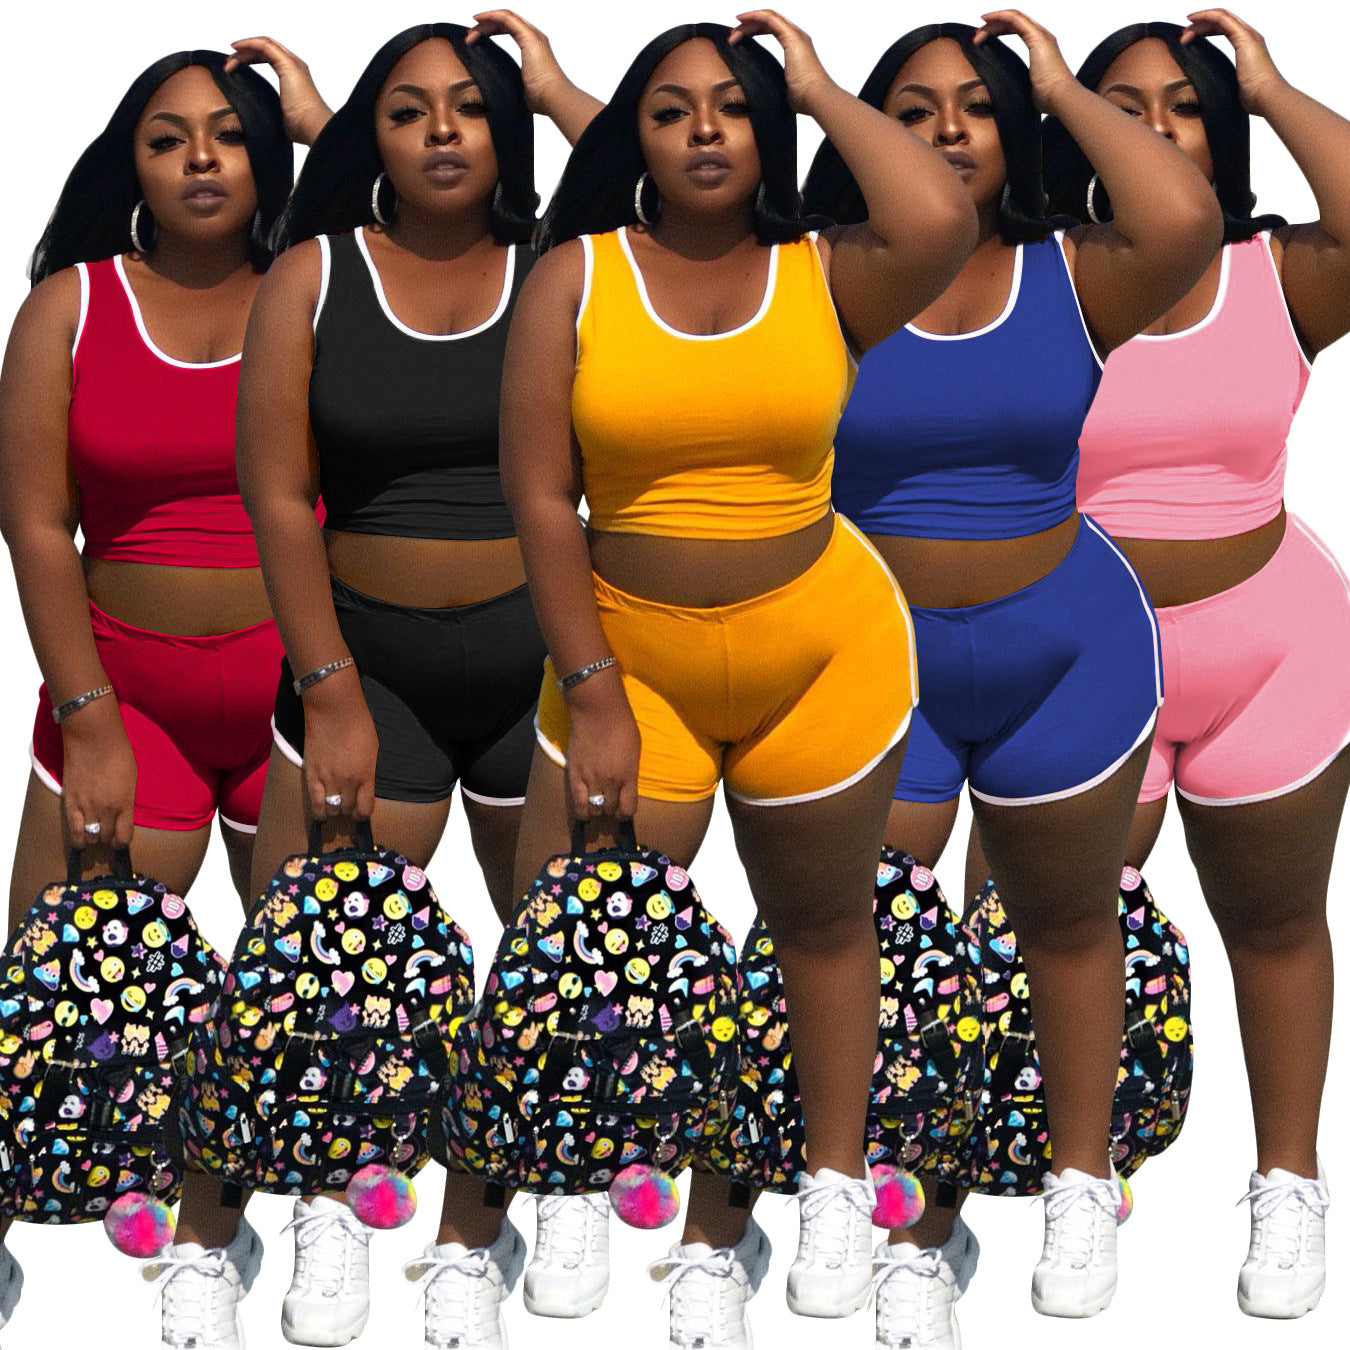 Plus size two piece sportswear gym crop top shorts sets fitness exercise workout yoga tracksuit running workout